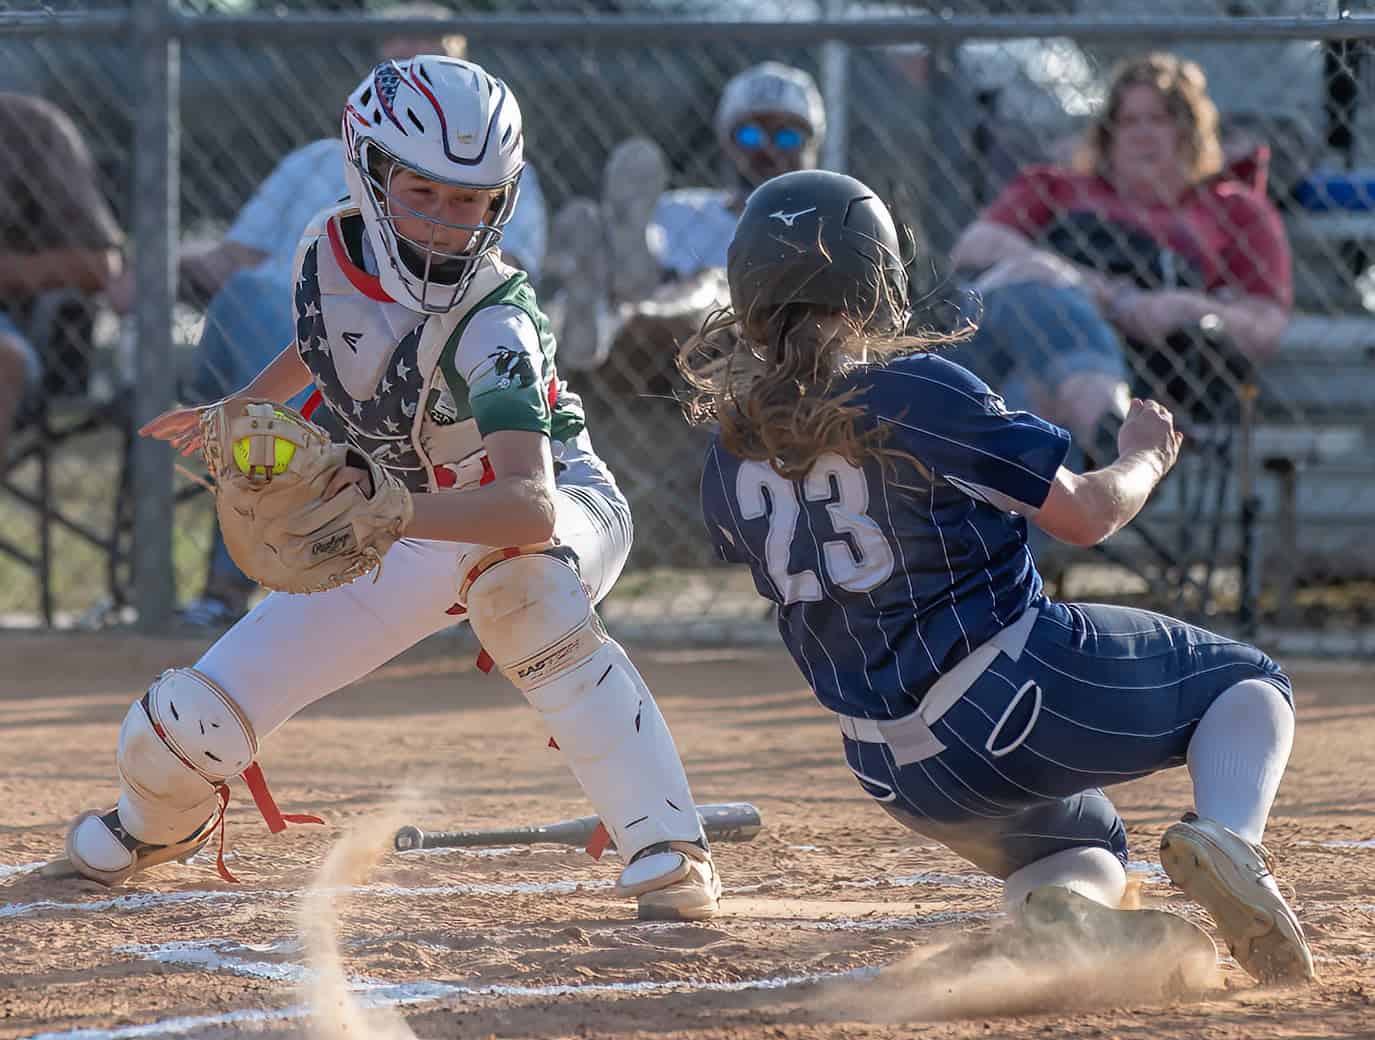 Weeki Wachee High’s catcher, Reagan Miller tries to put a tag on Central High’s Kaylee Reese ,23, as she scores in the 10 run first inning for the Bears in the 4A District 5 playoff game . Photo by [Joseph Dicristofalo]